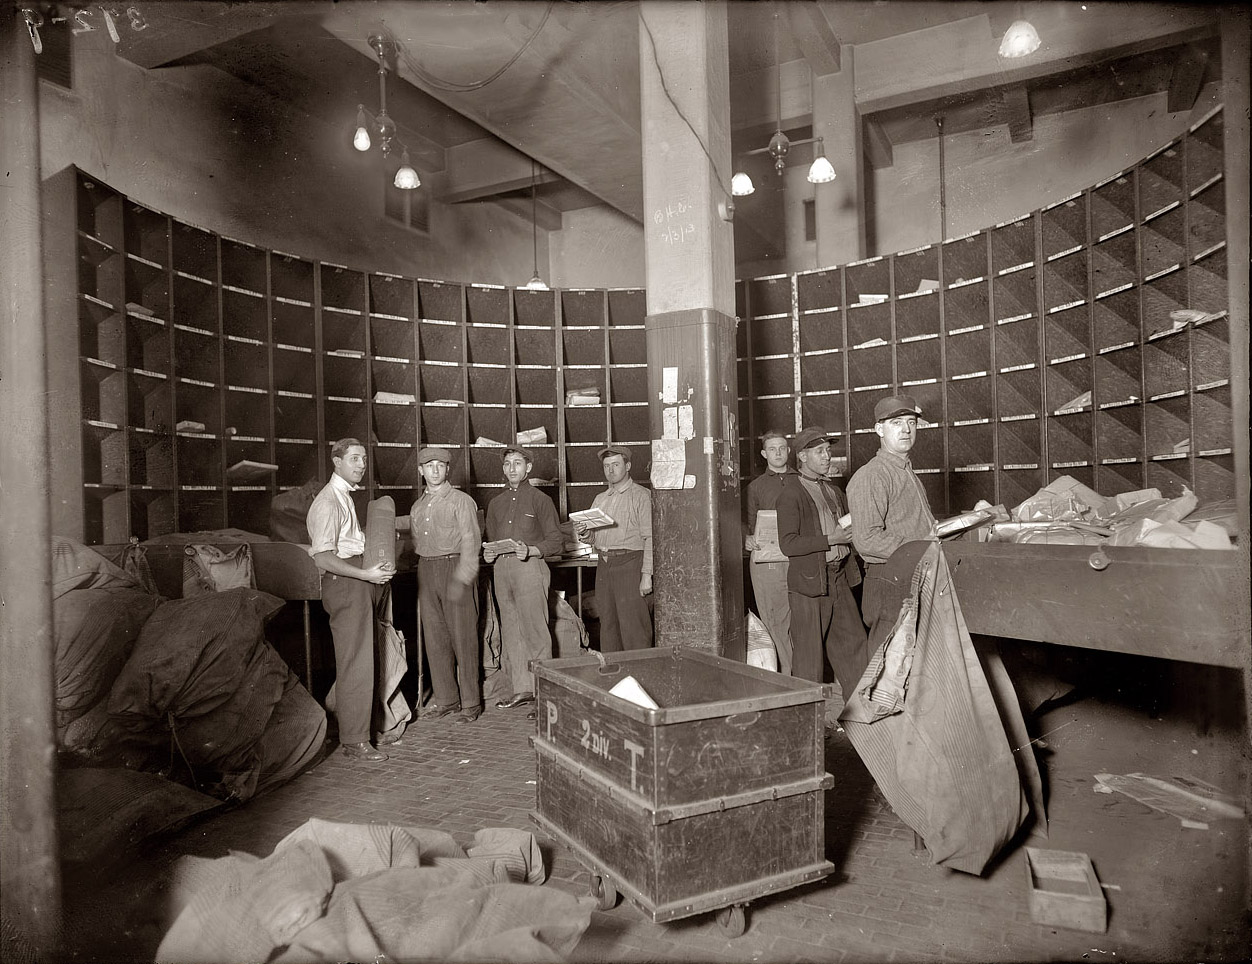 February 3, 1913. "Interior: N.Y. Post Office." 8x10 glass negative, George Grantham Bain Collection. View full size. 